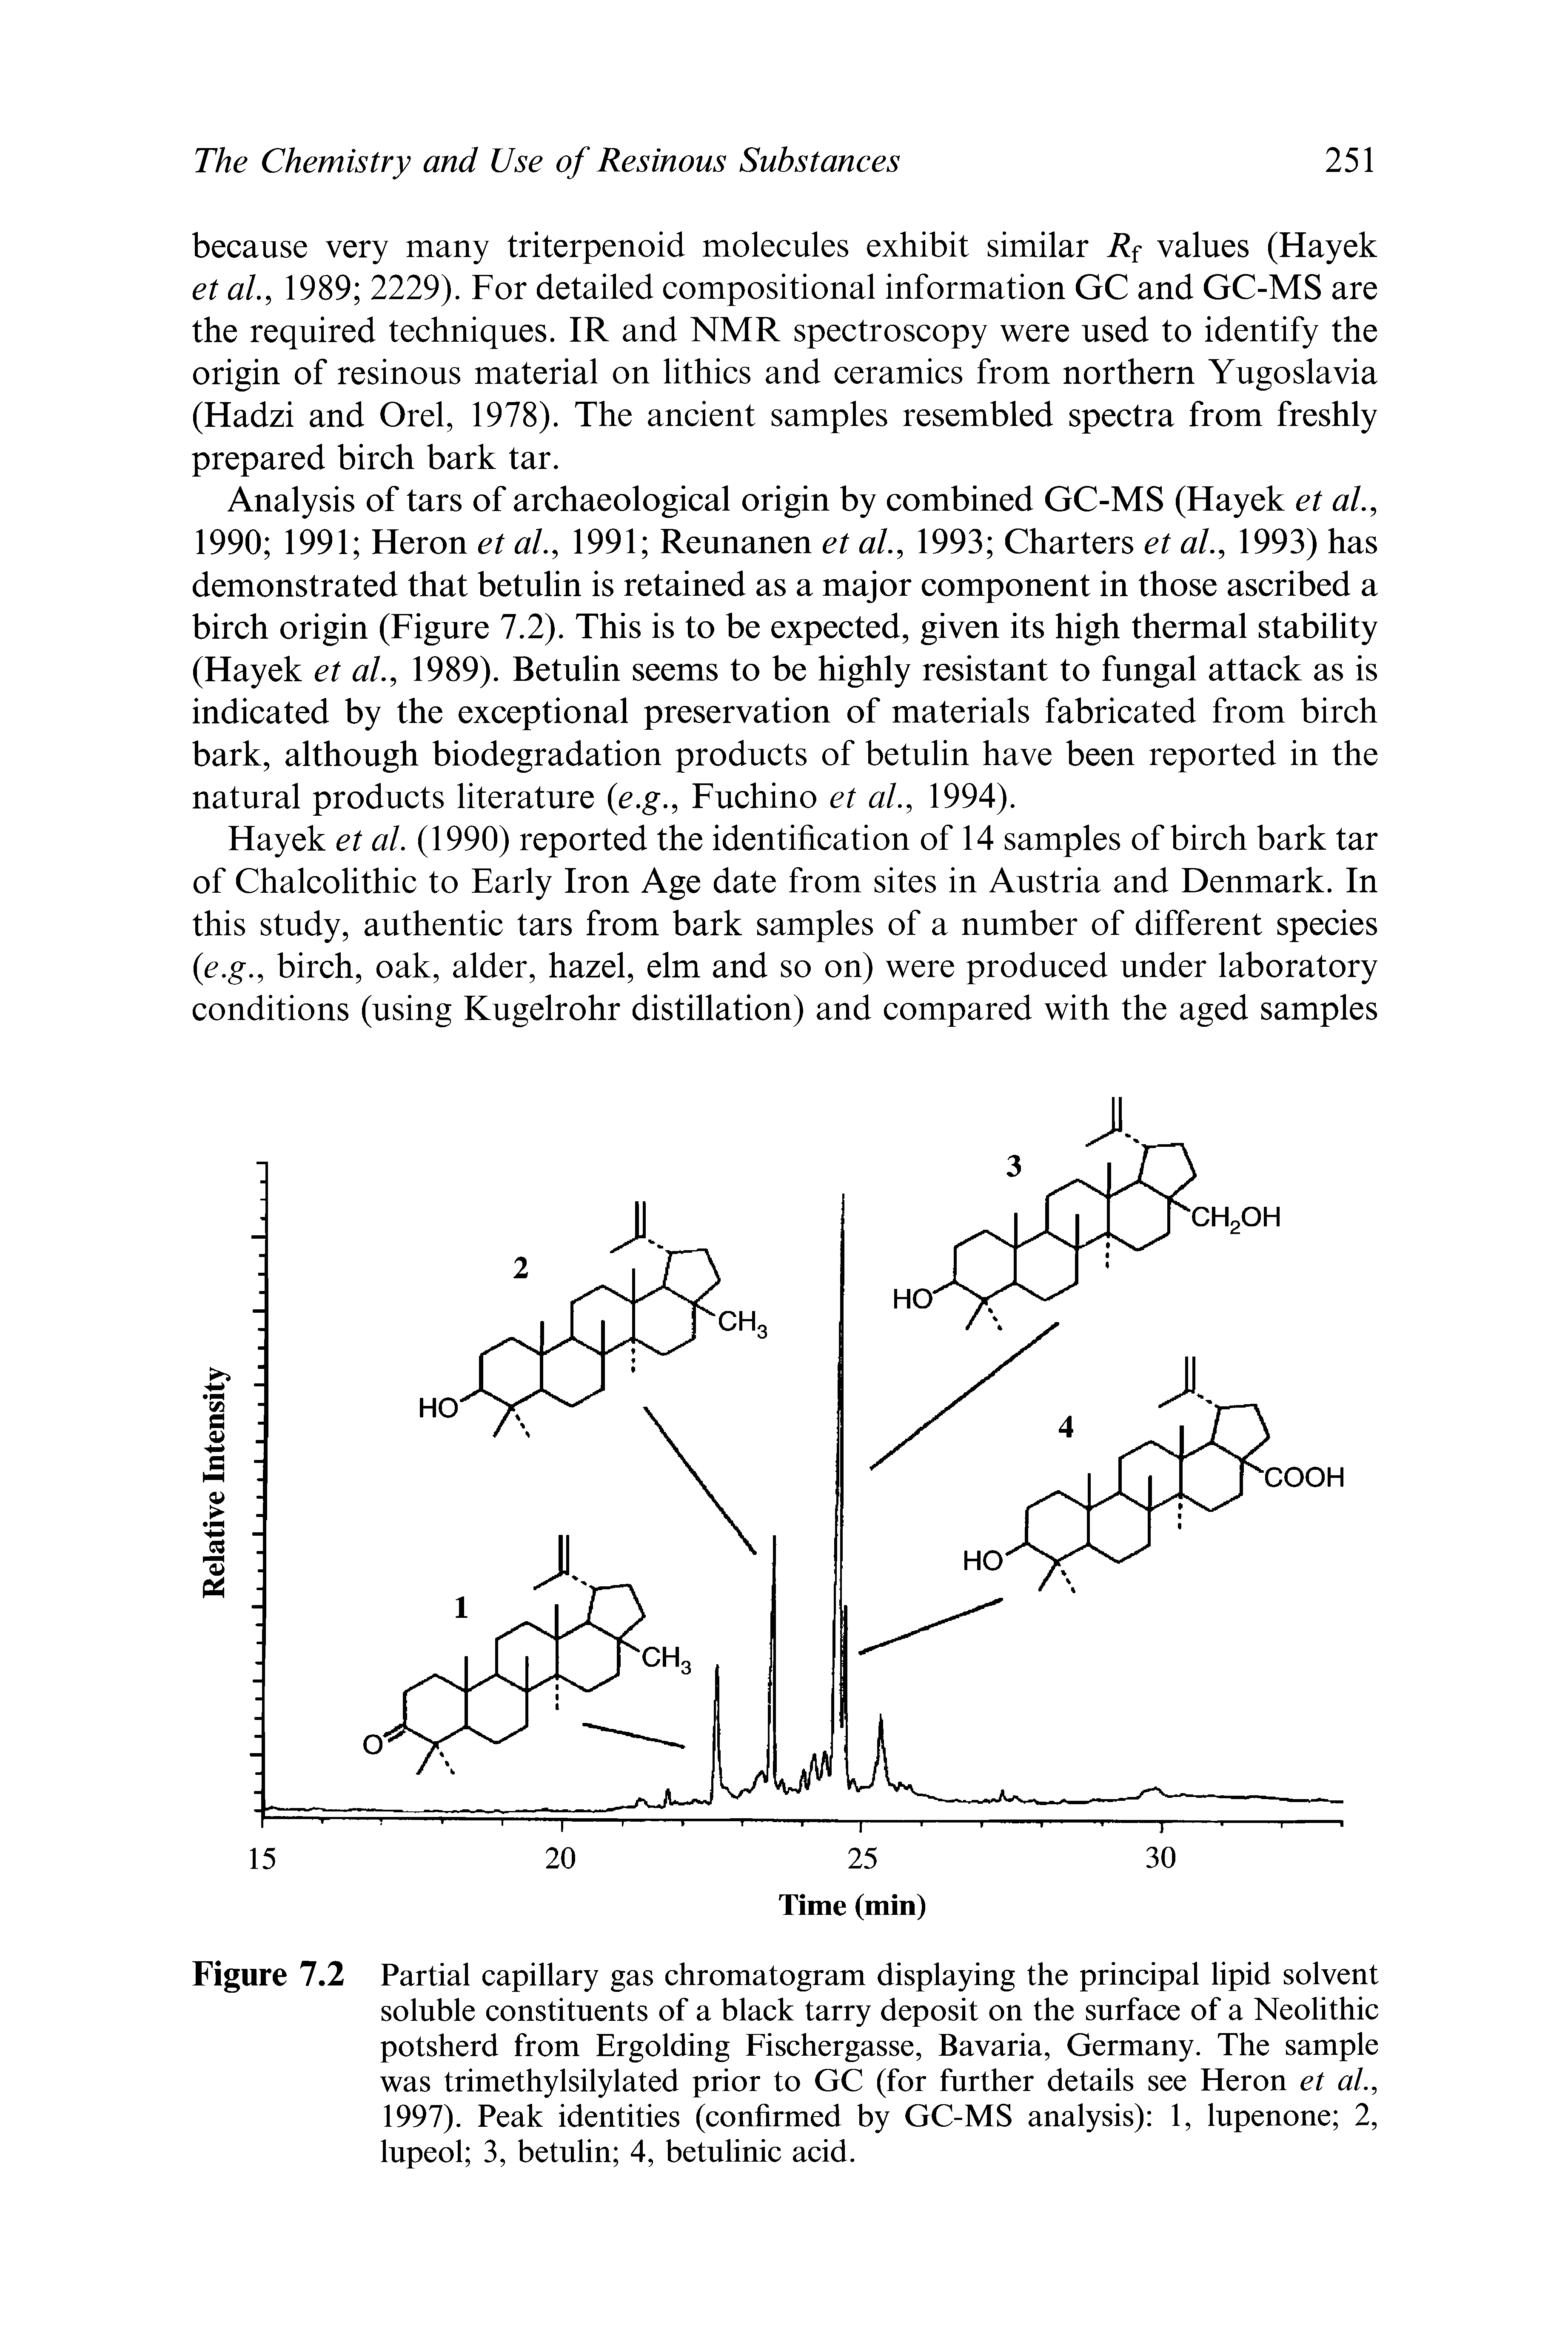 Figure 7.2 Partial capillary gas chromatogram displaying the principal lipid solvent soluble constituents of a black tarry deposit on the surface of a Neolithic potsherd from Ergolding Fischergasse, Bavaria, Germany. The sample was trimethylsilylated prior to GC (for further details see Heron et al., 1997). Peak identities (confirmed by GC-MS analysis) 1, lupenone 2, lupeol 3, betulin 4, betulinic acid.